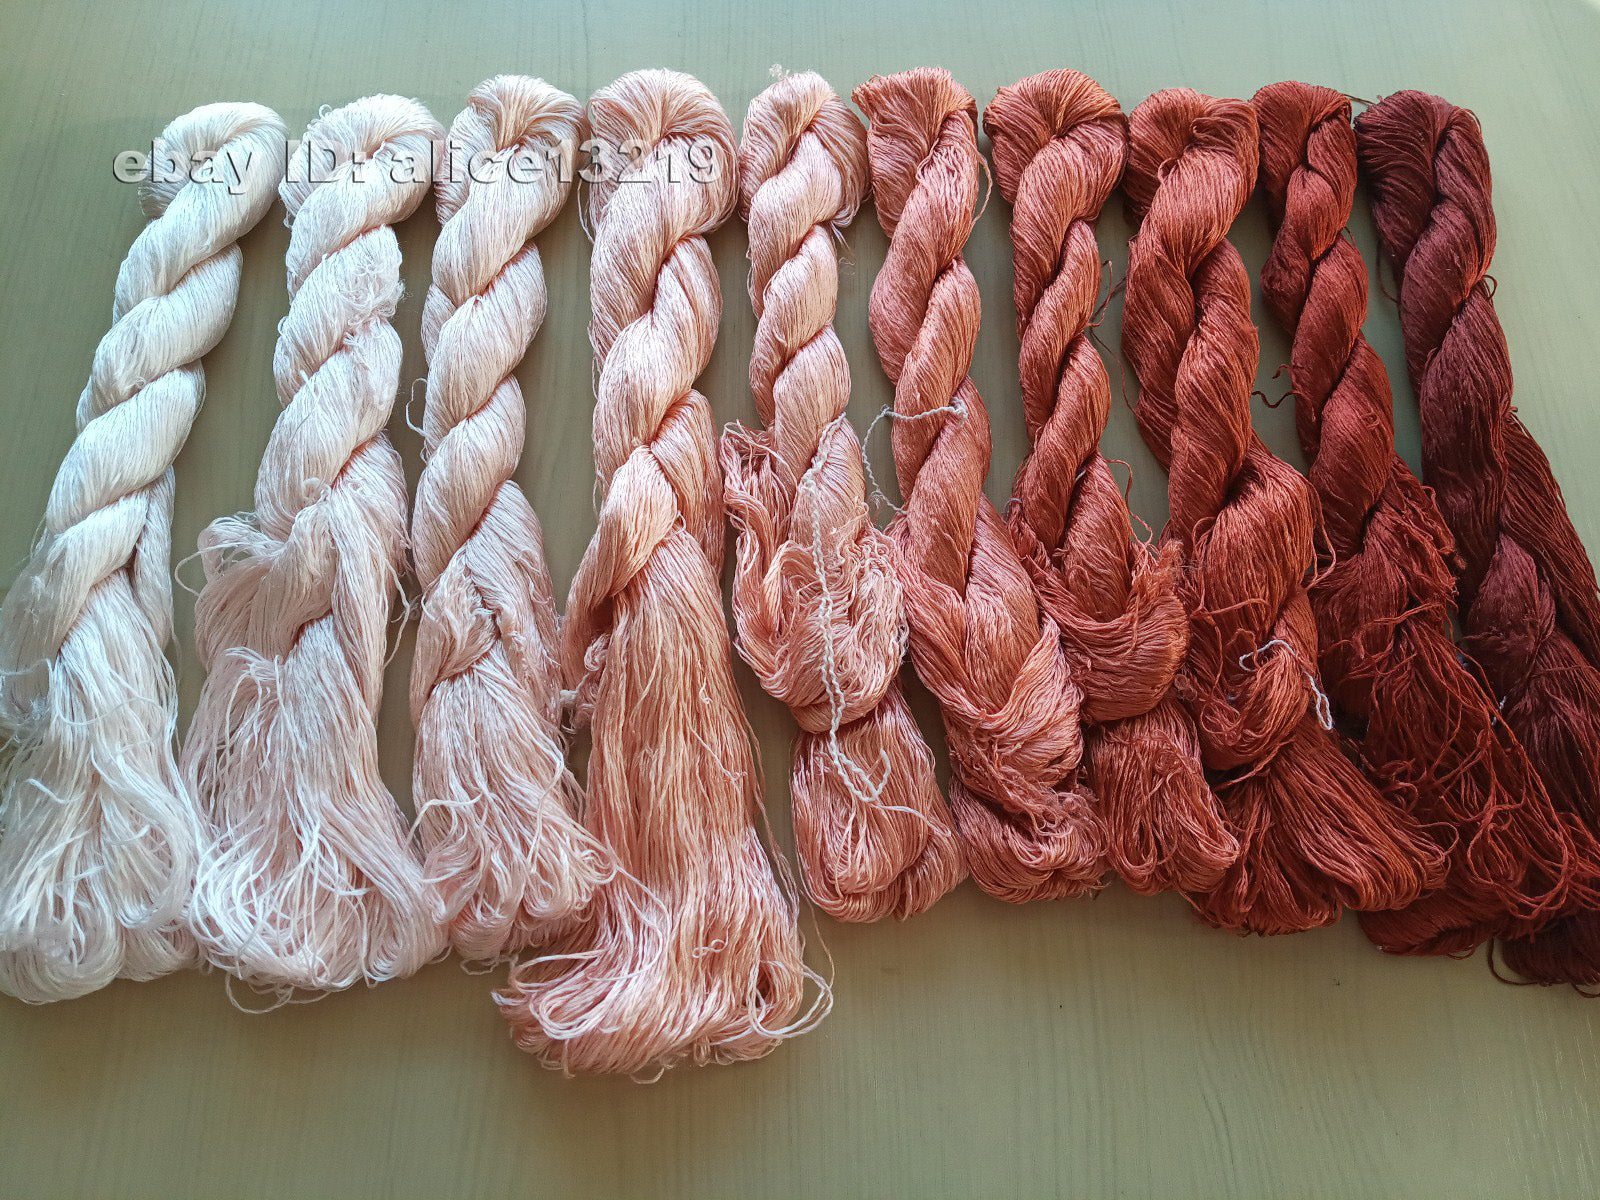 10bundles 100%real mulberry silk,hand-dyed embroidery silk floss/thread N93